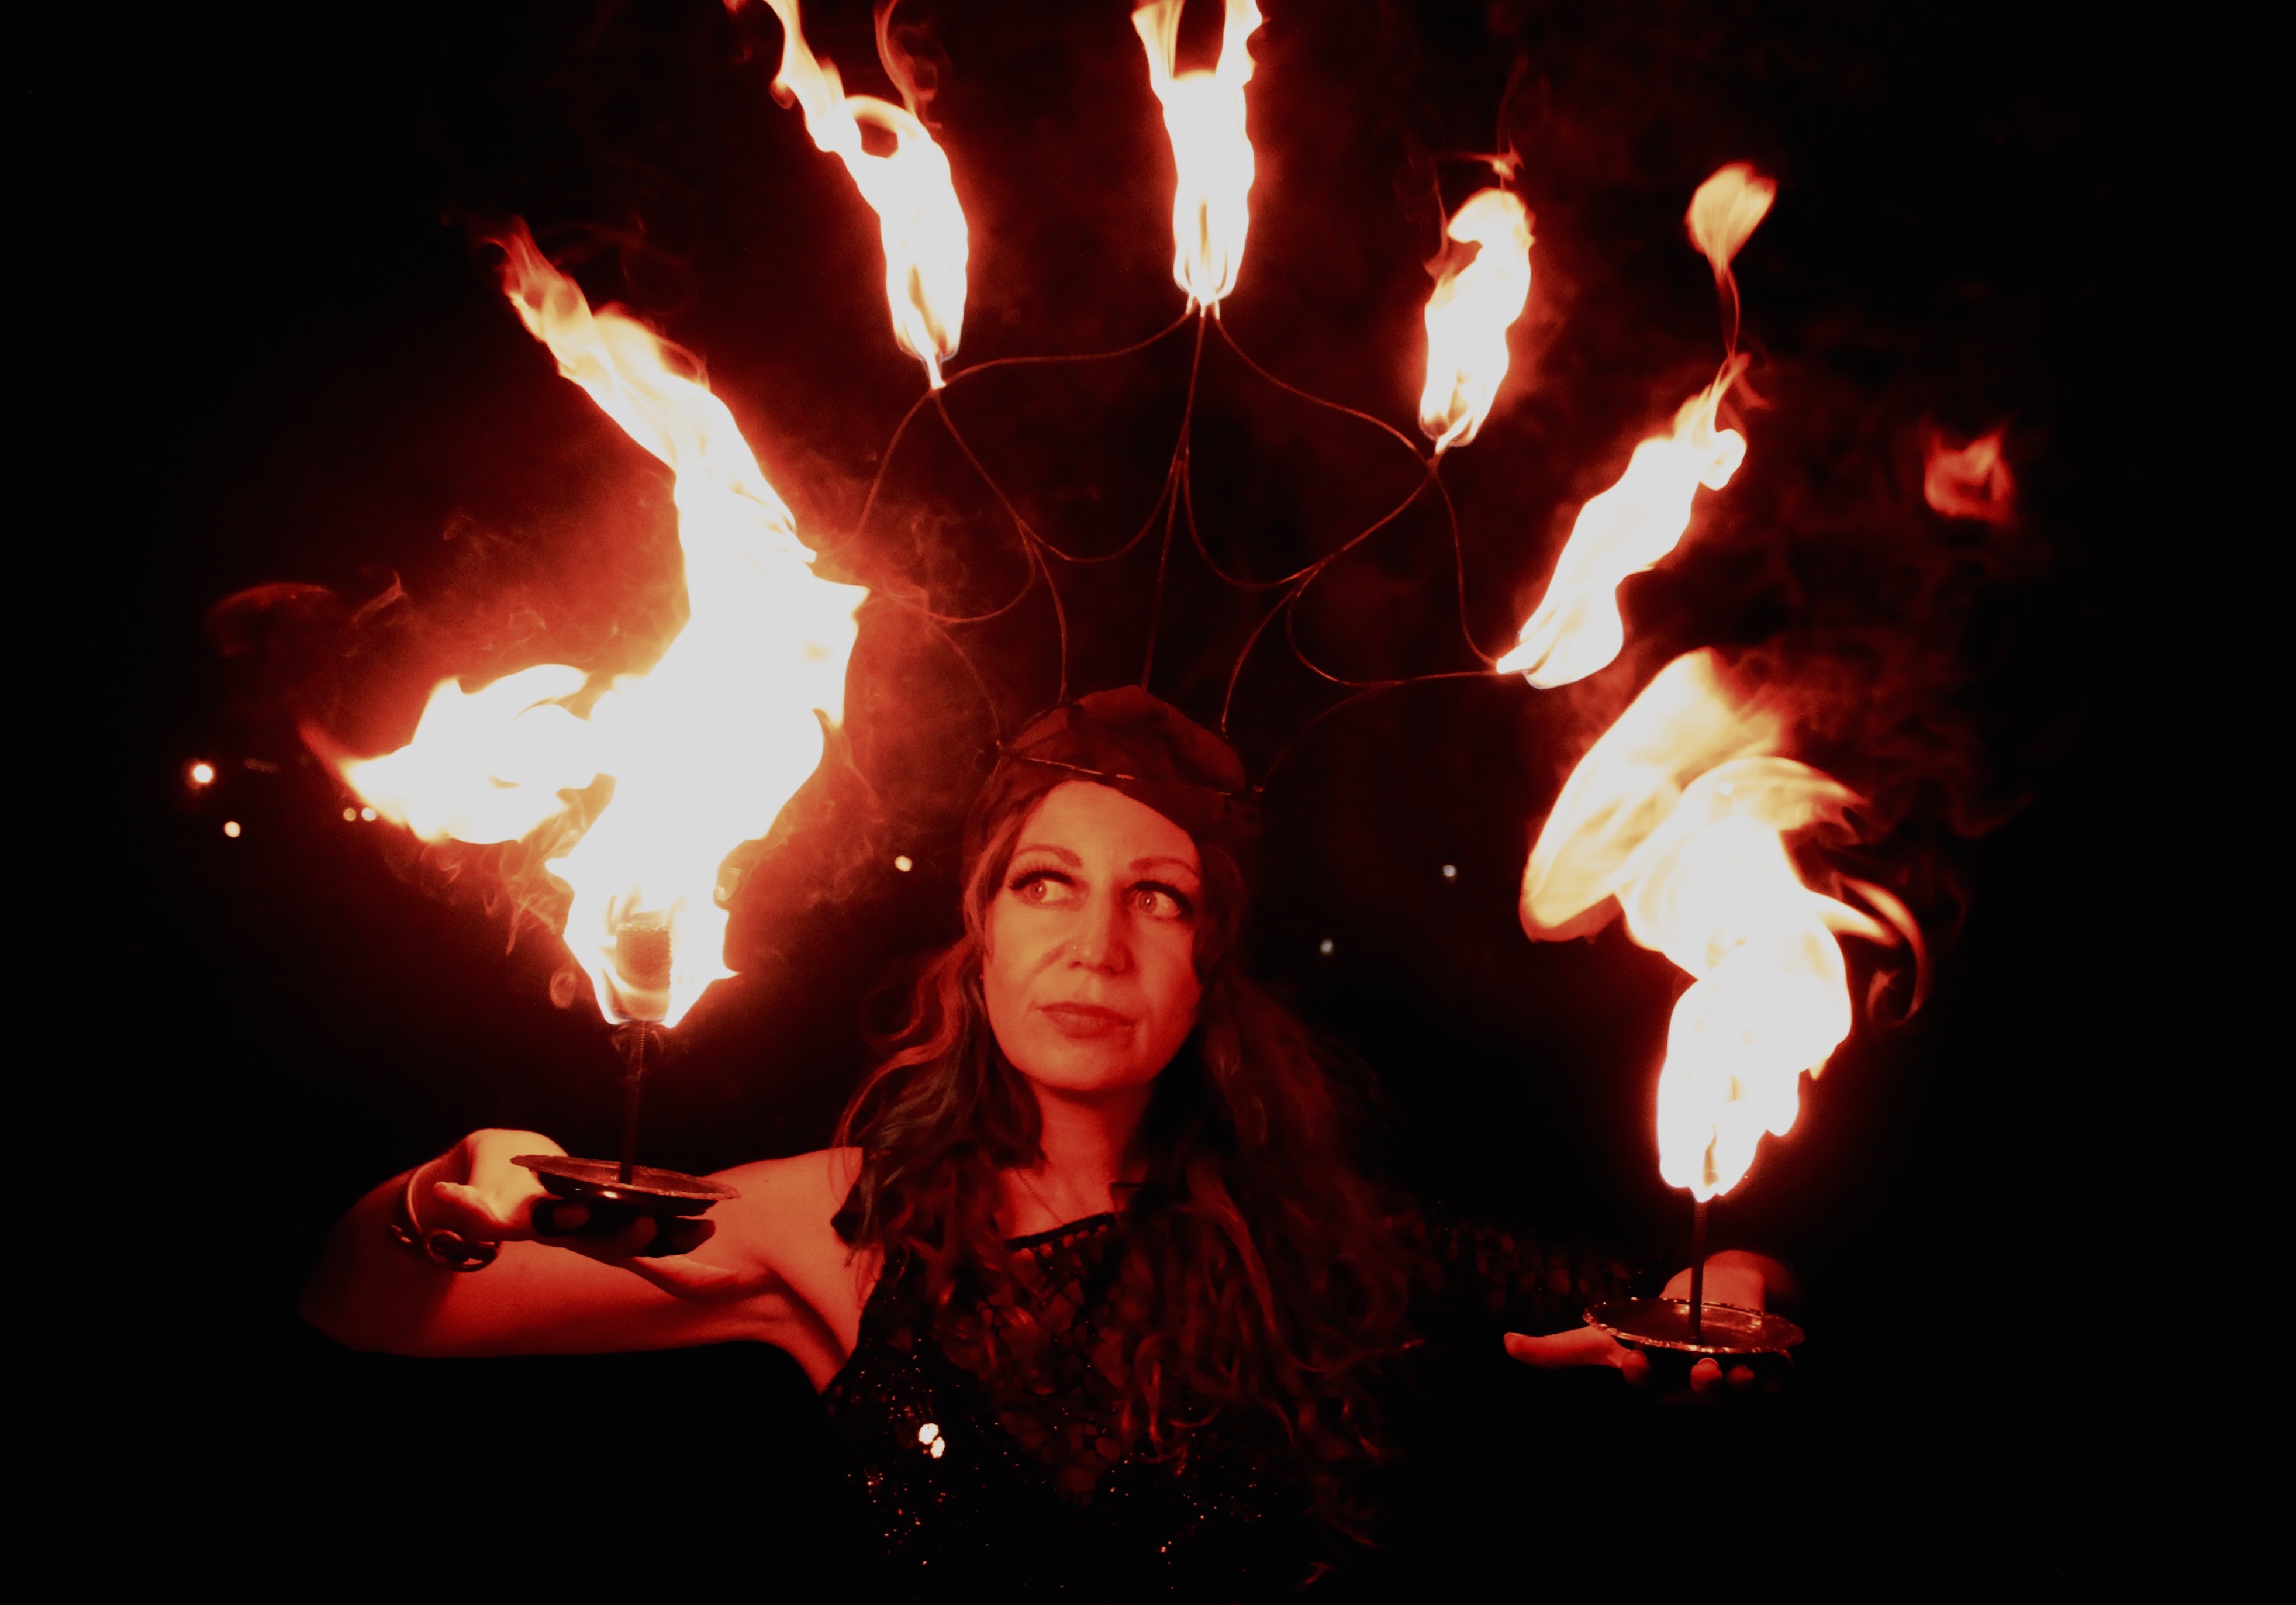 fire headress and fire palm torches on a dancer with eyes looking up